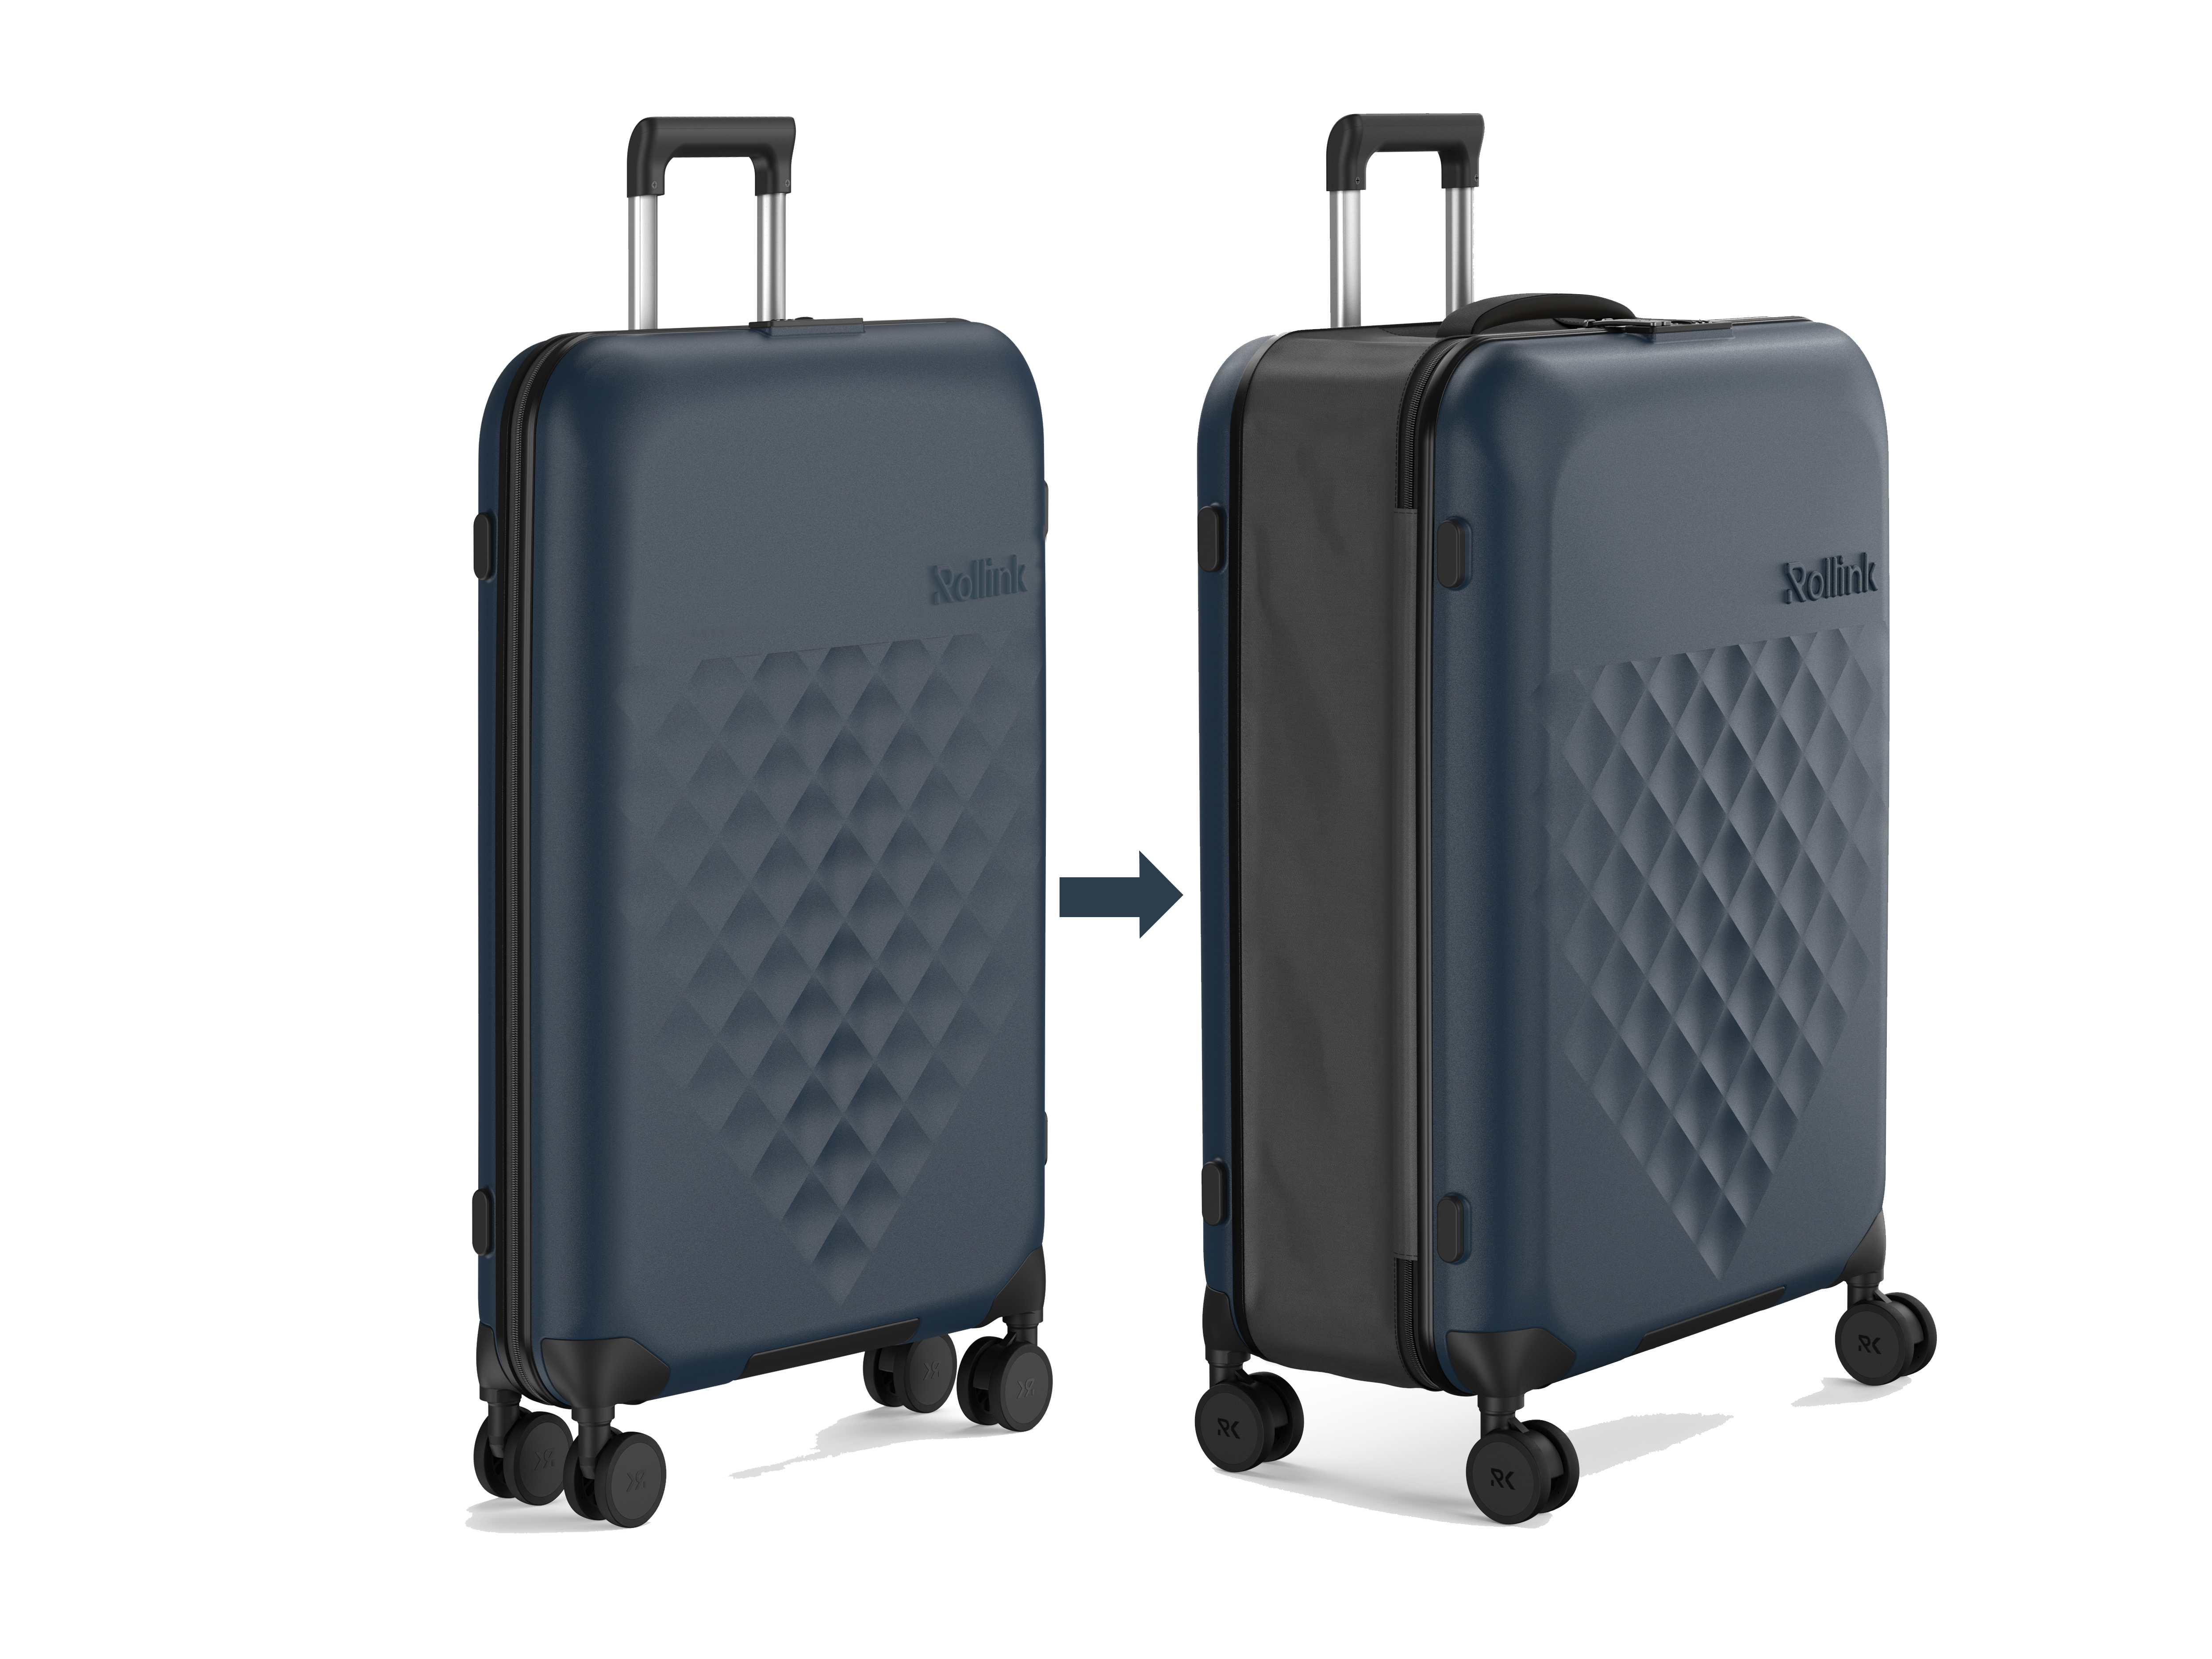 Rollink Flex 360° Spinner Collapsible 4-Wheel 29 inch Checked Luggage, Atlantic Blue